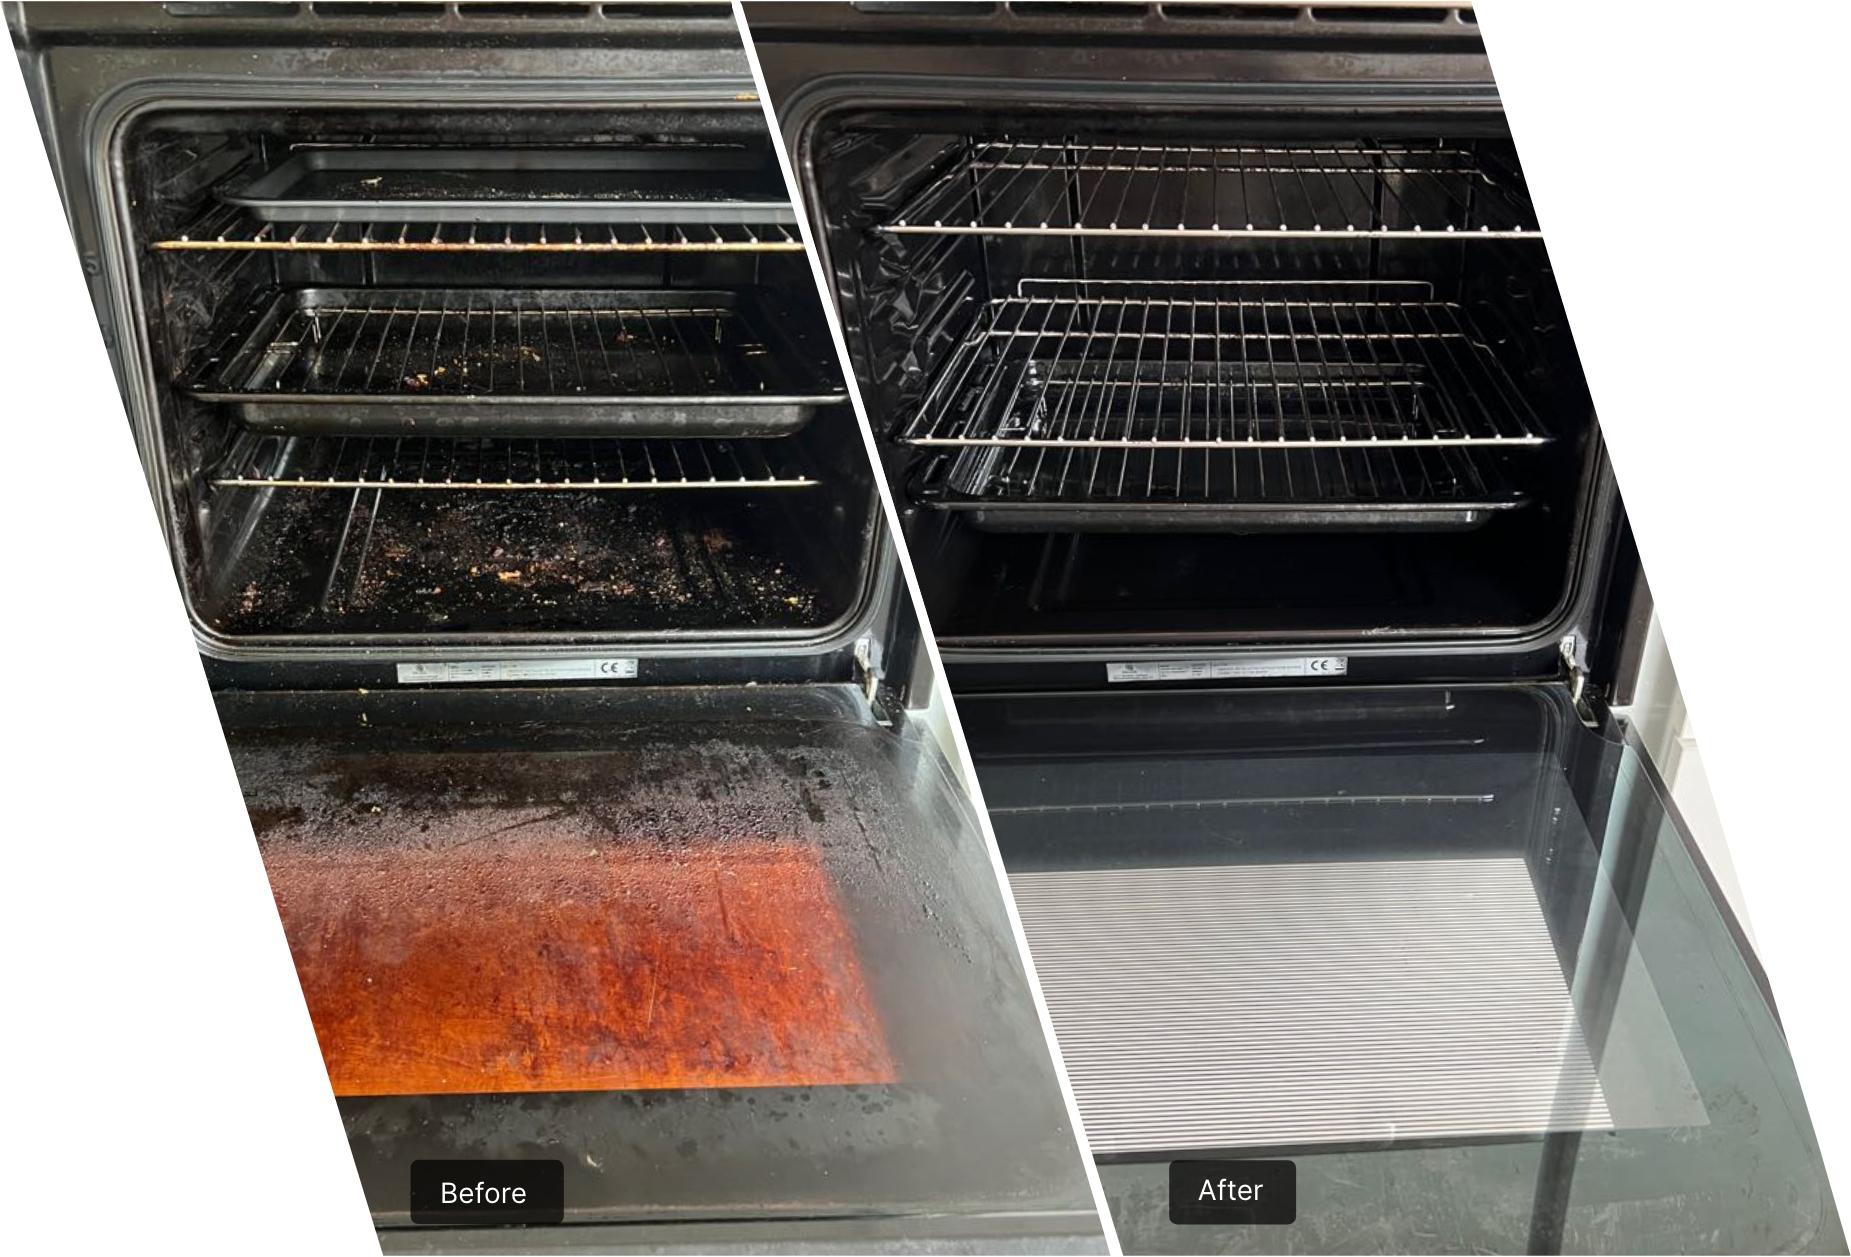 The image shows two front shots of the same oven. In the first one, the oven is shown to be quite dirty. It is heavily caked with greasy splatters and crusty chunks of food. On the second, after deep cleaning, the oven appears perfectly clean and shiny.